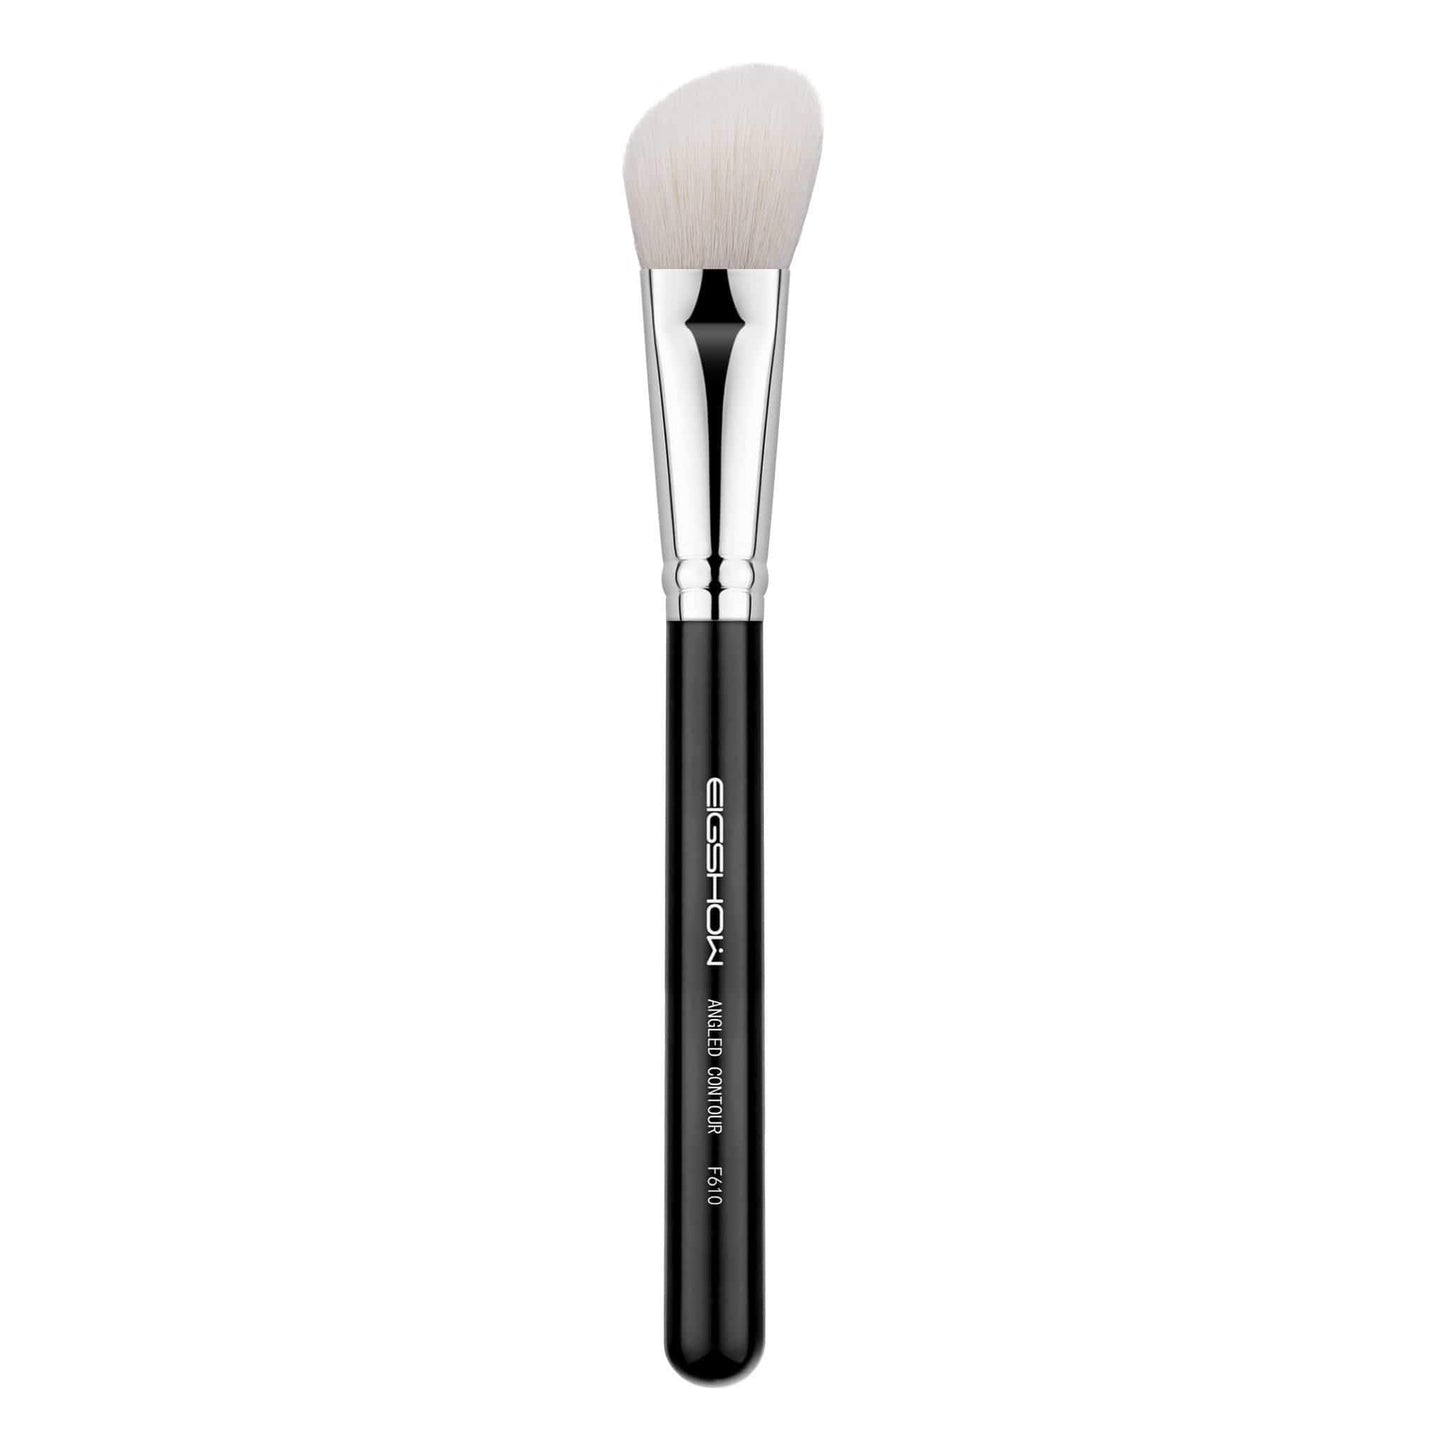 F610 - SMALL ANGLED CONTOUR BRUSH - EIGSHOW Beauty